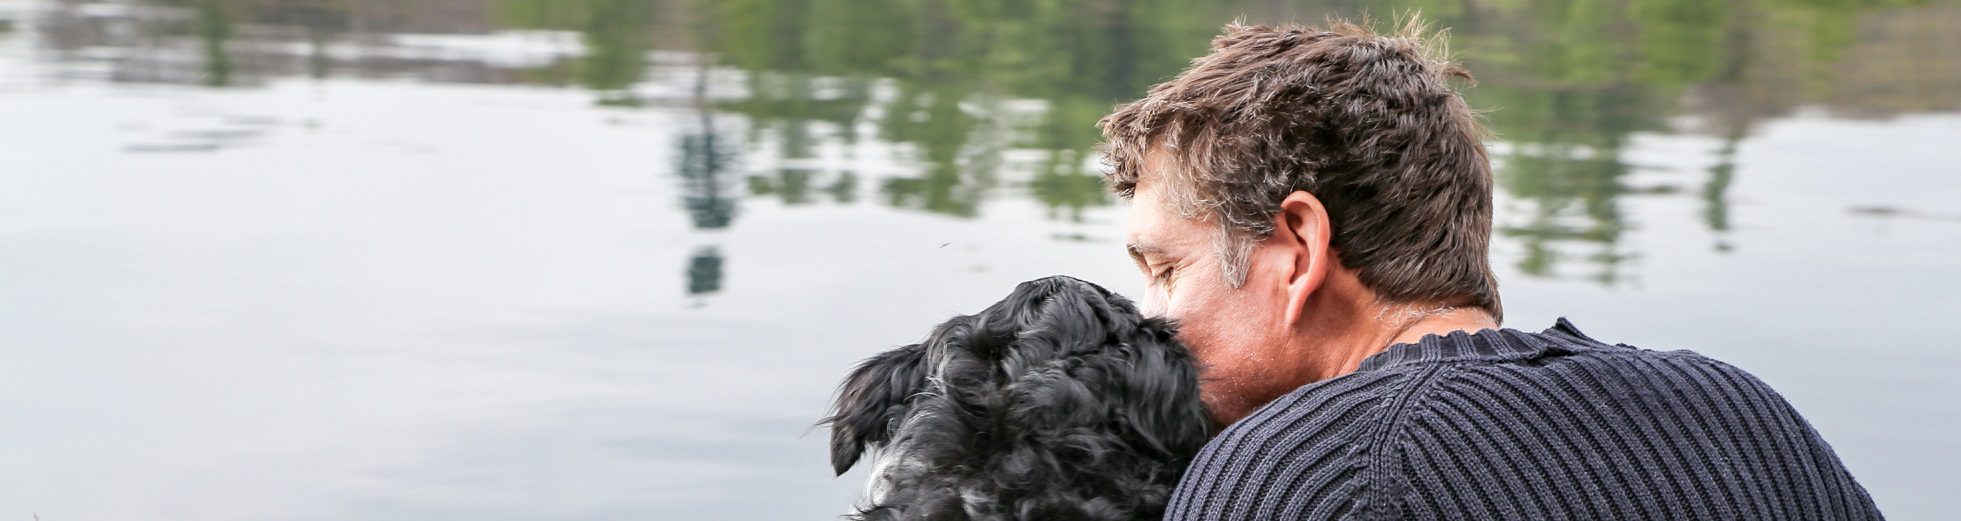 Behind view of man and dog sitting and hugging in front of lake